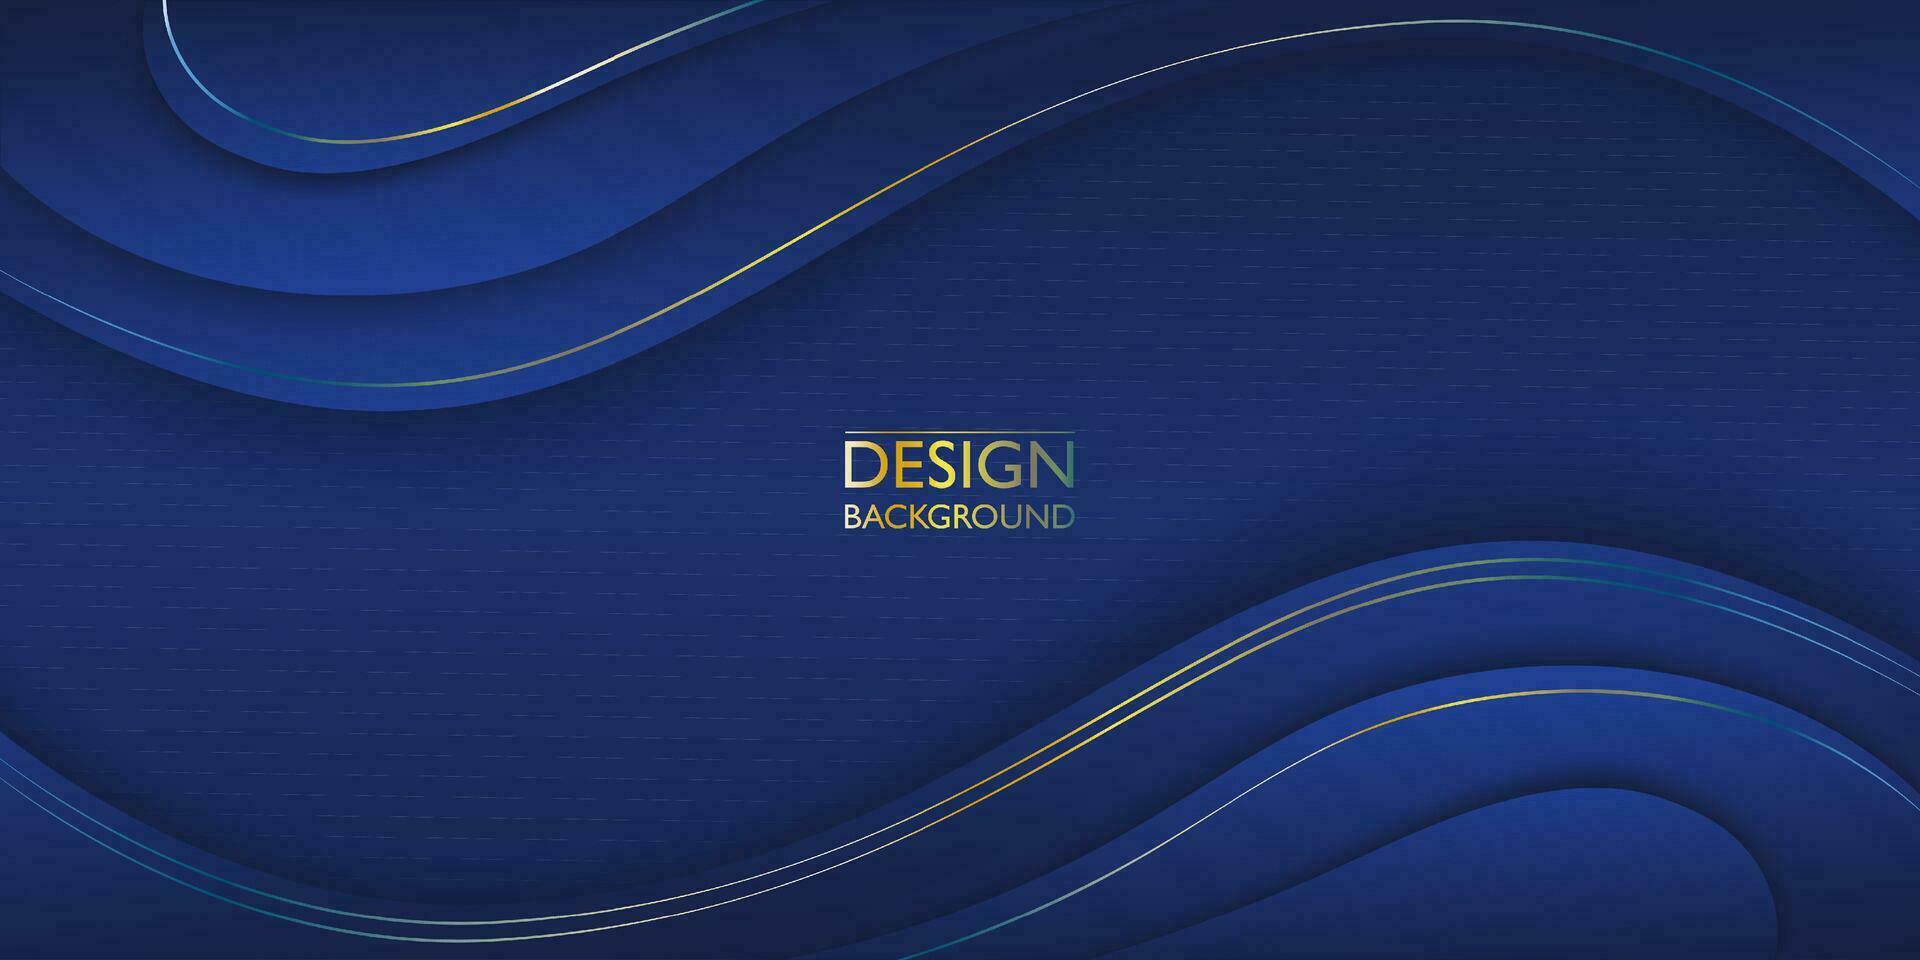 Abstract luxury gold blue wave template design. Contemporary style graphic. Vector illustration for presentation, banner, cover, web, flyer, card, poster, wallpaper, texture, slide, social media.